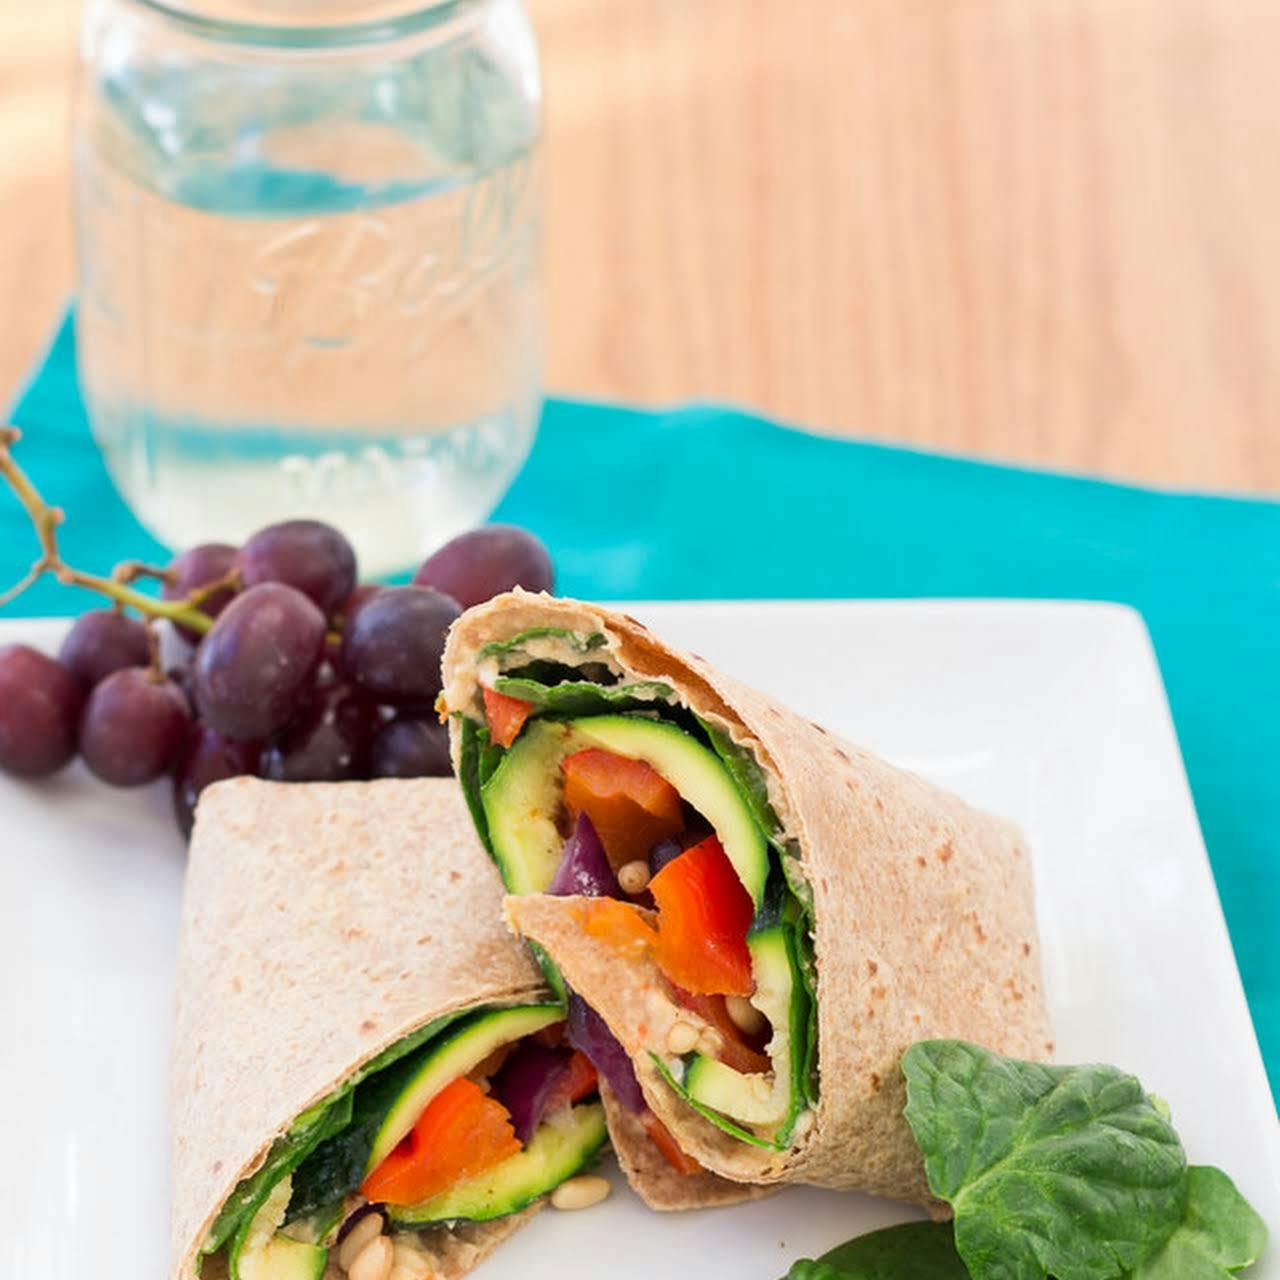  A carrot, hummus, and arugula wrap with grapes and walnuts